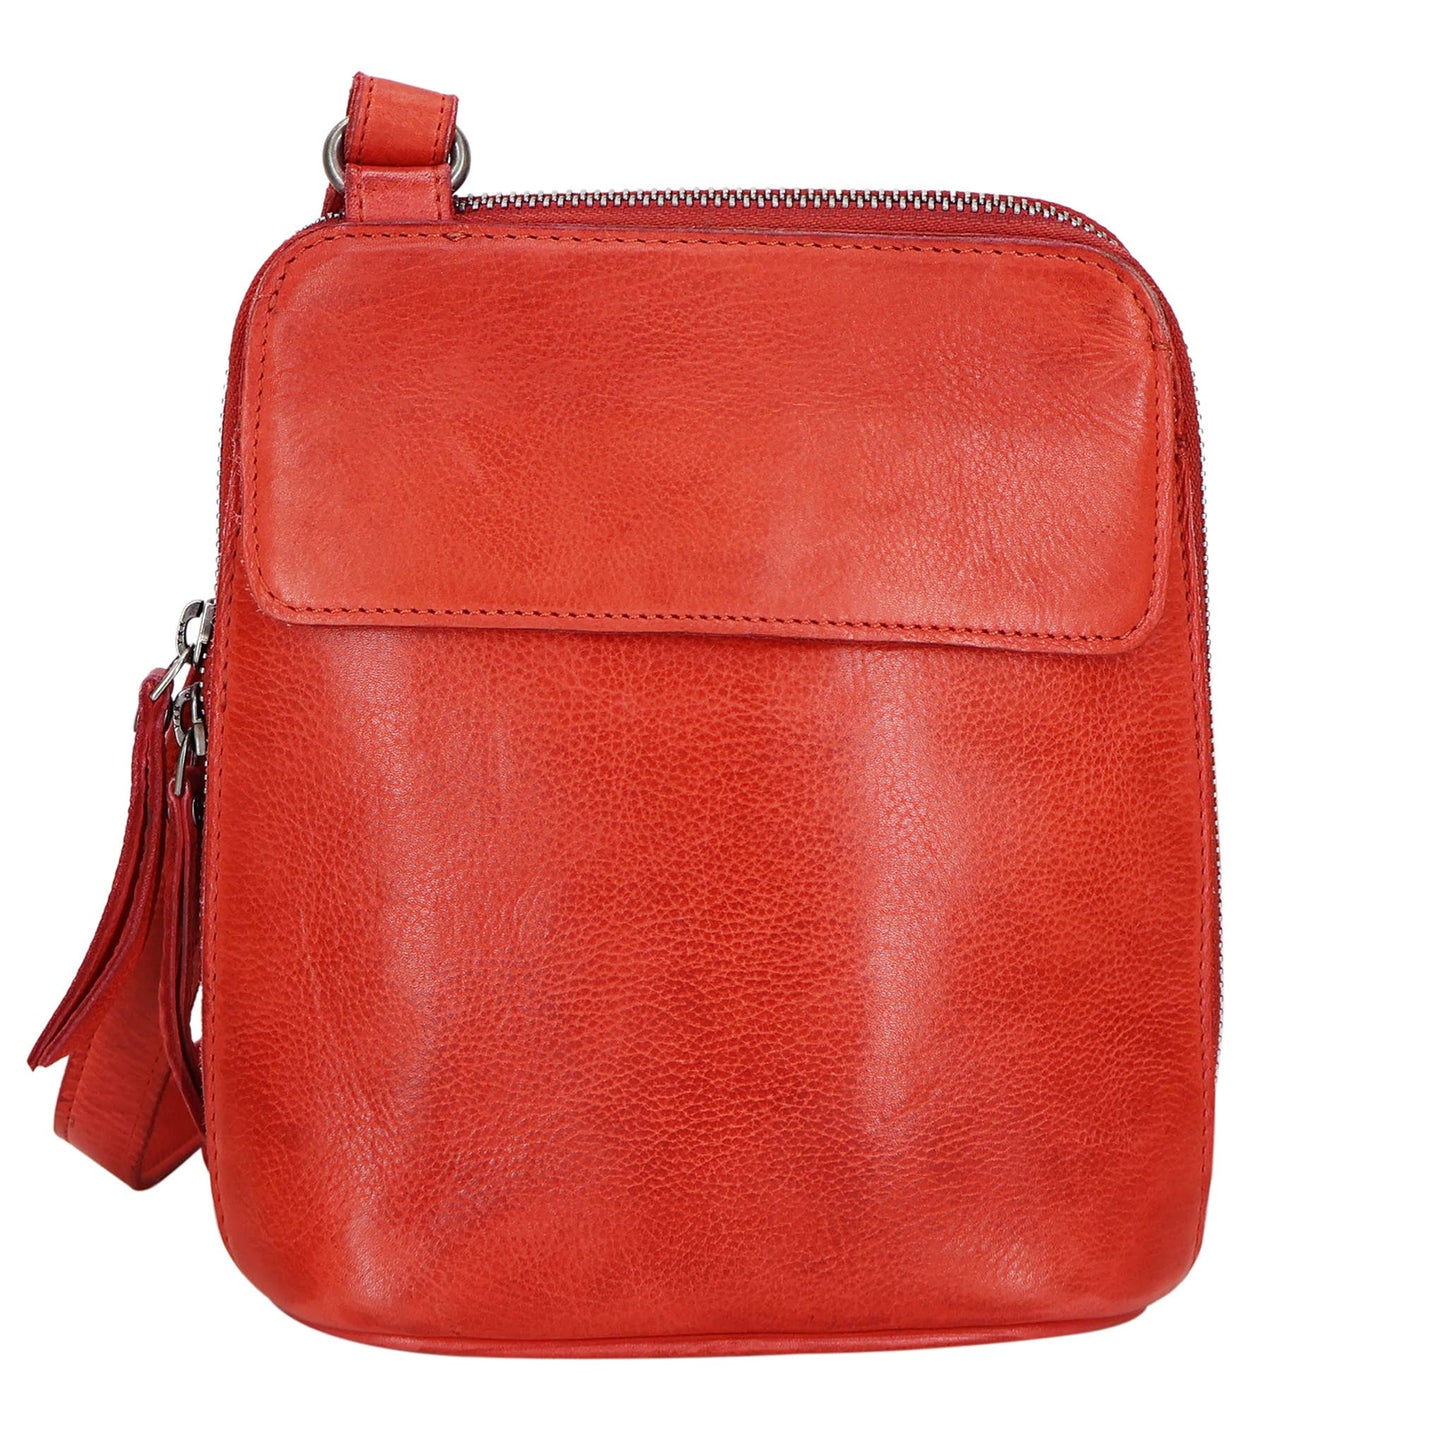 Lucy Handcrafted Leather Crossbody